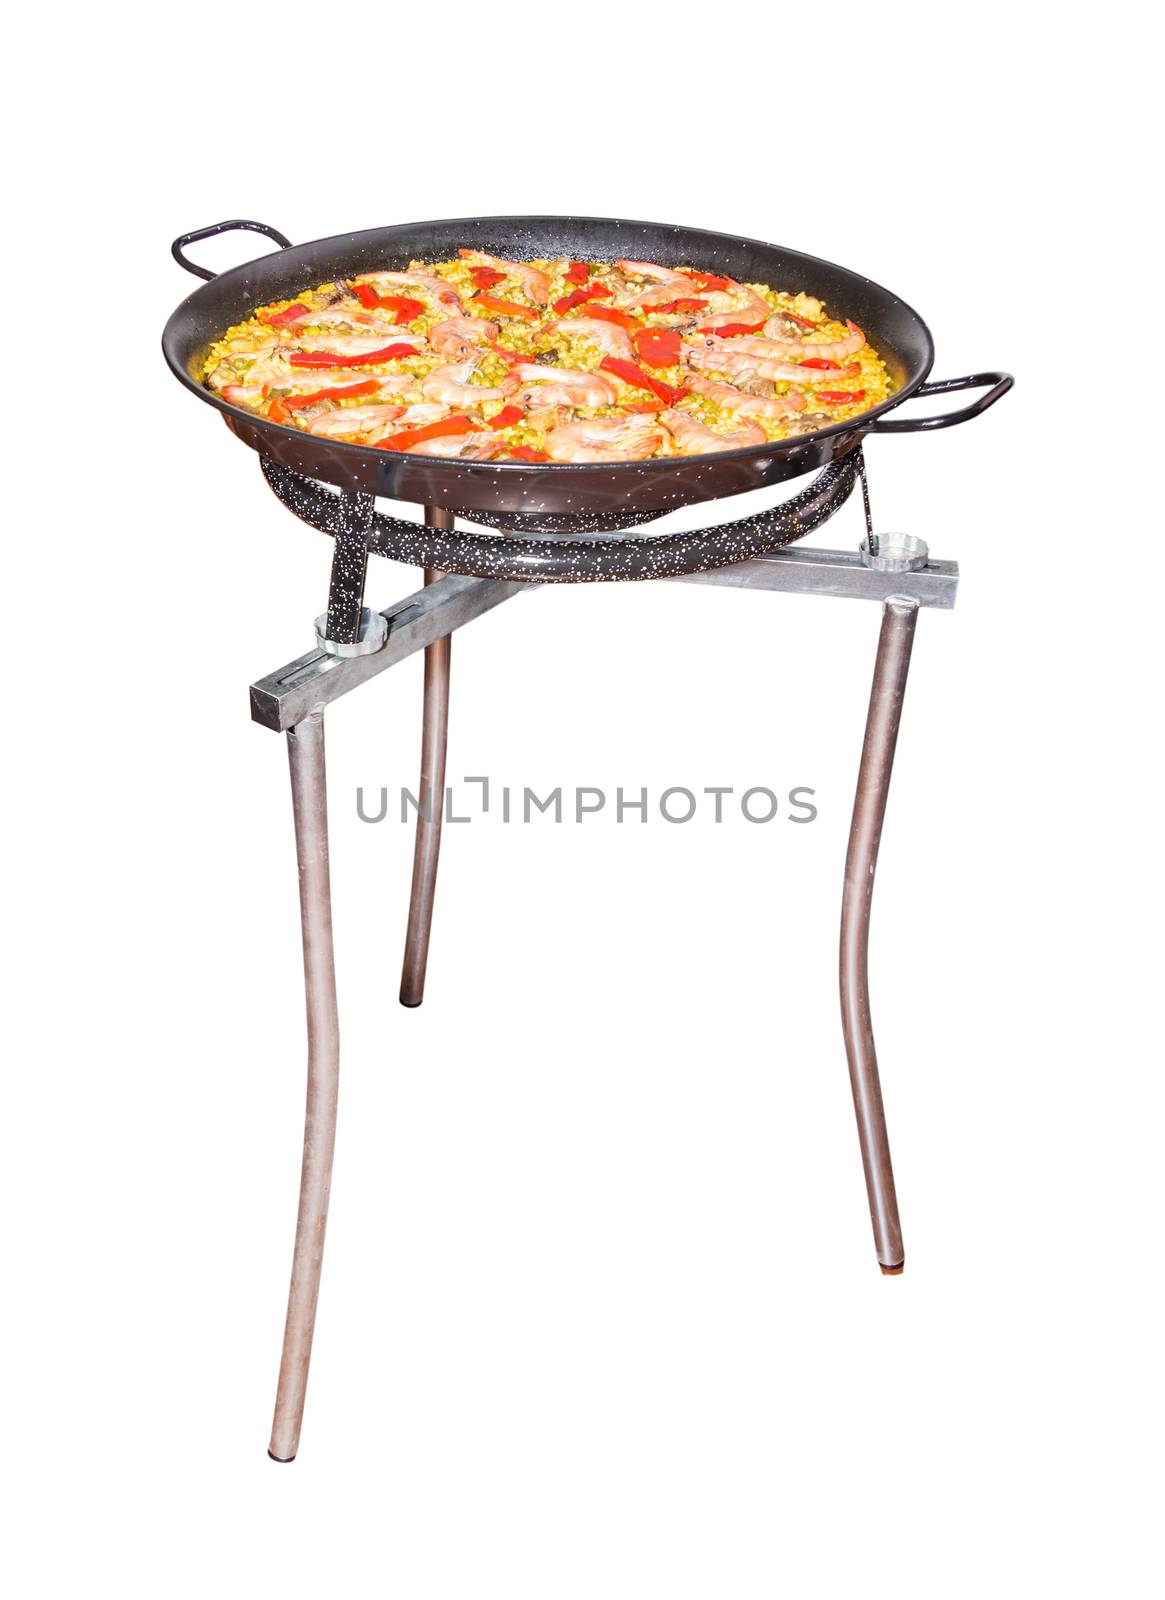 Traditional spanish paella in a pan by doble.d